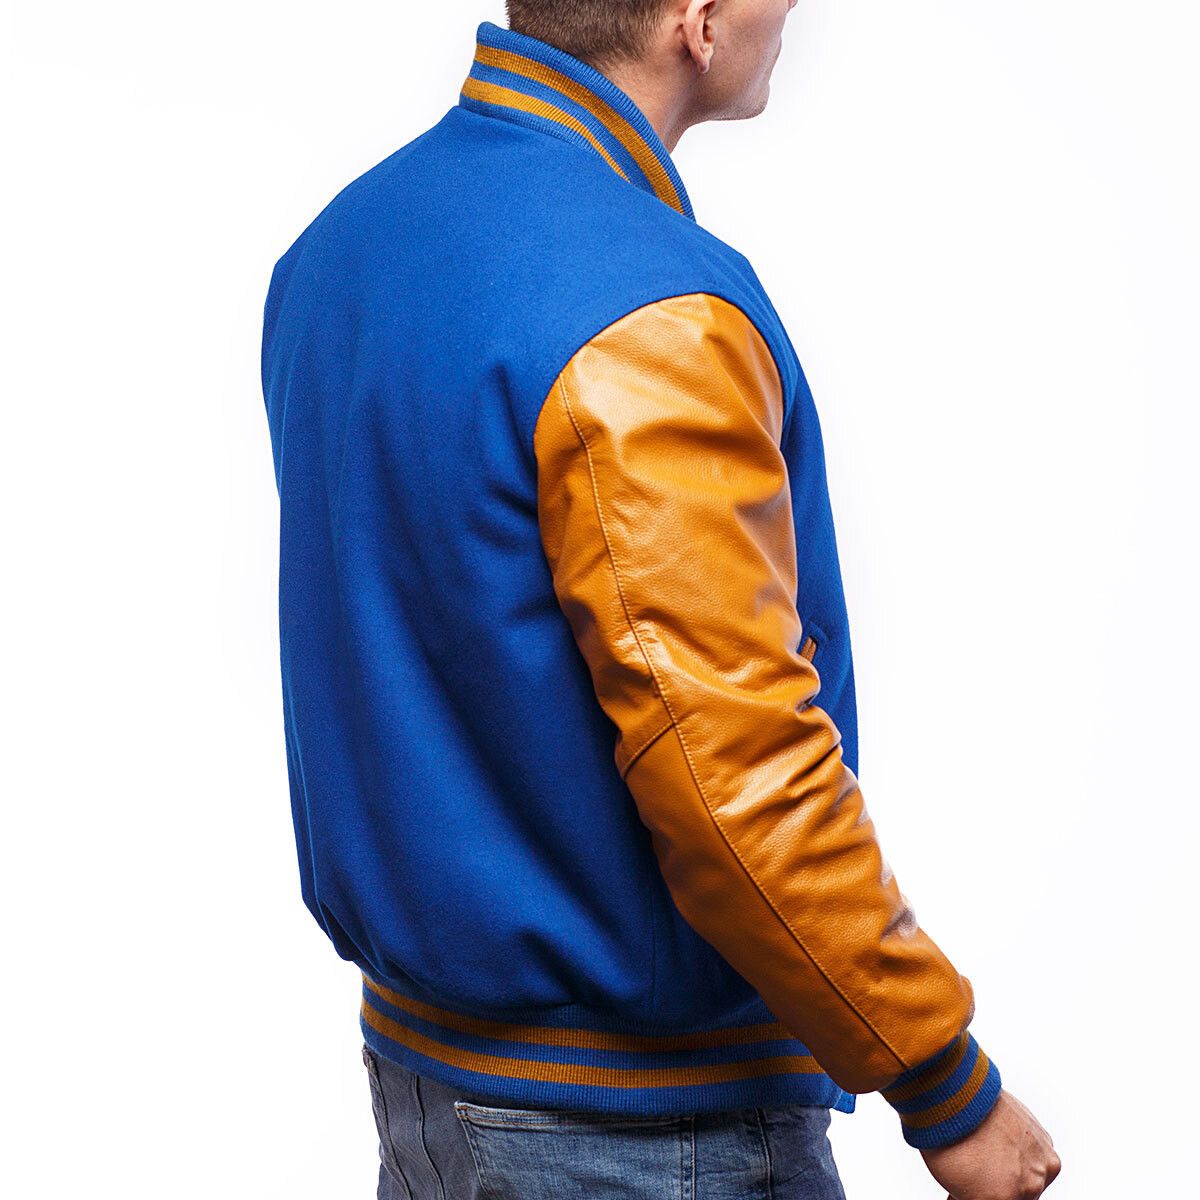 Royal Blue Letterman Jacket with Gold Leather Sleeves - Graduation